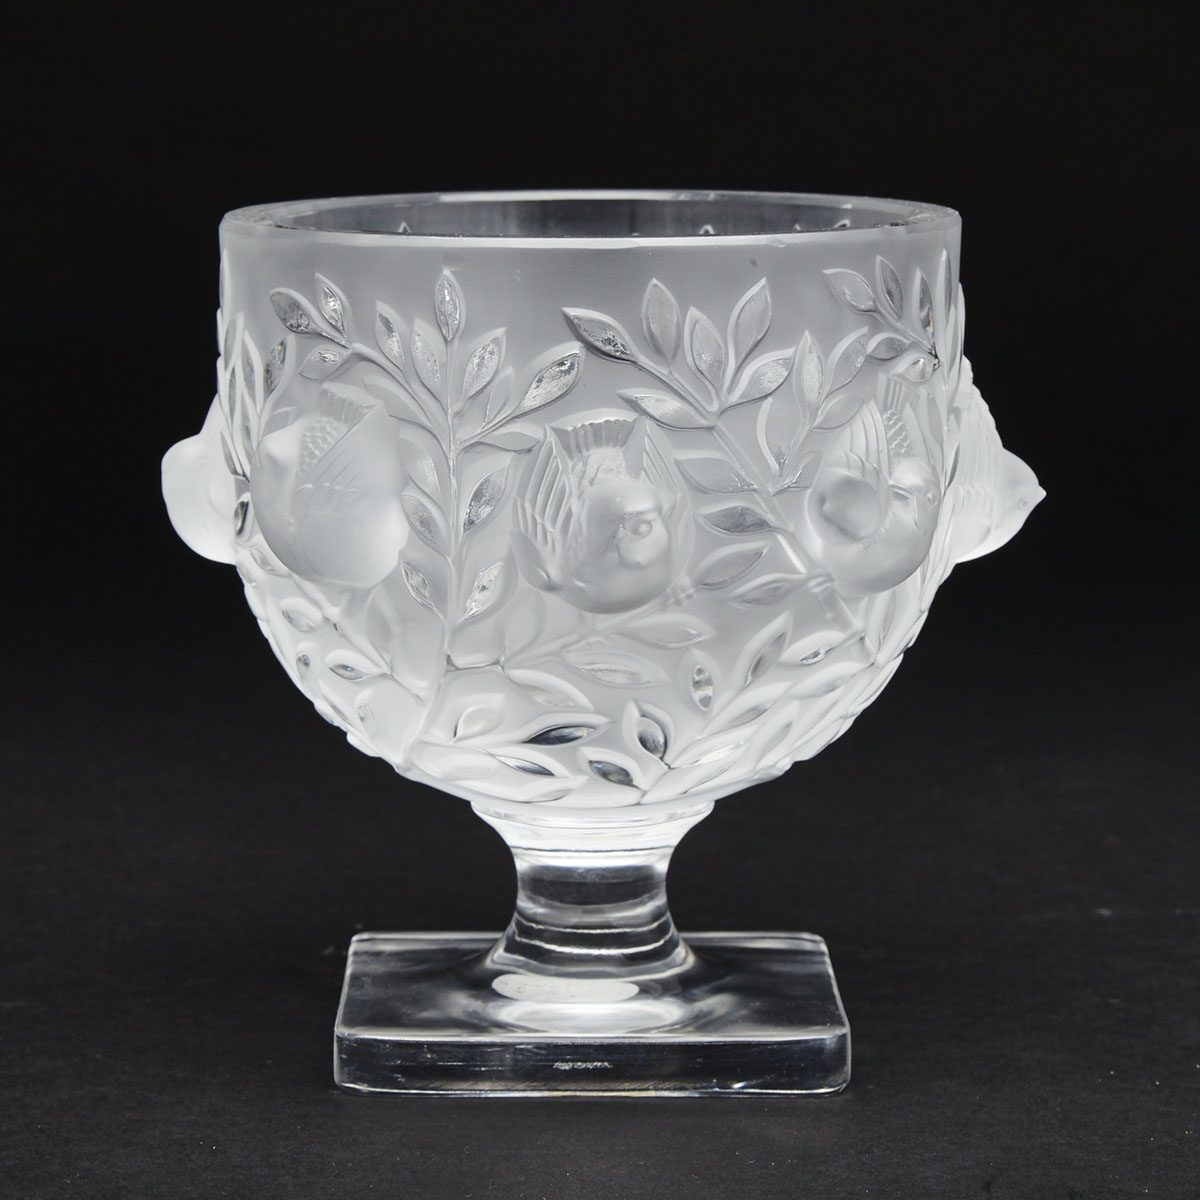 ‘Elizabeth’, Lalique Moulded and Frosted Glass Footed Bowl, post-1945